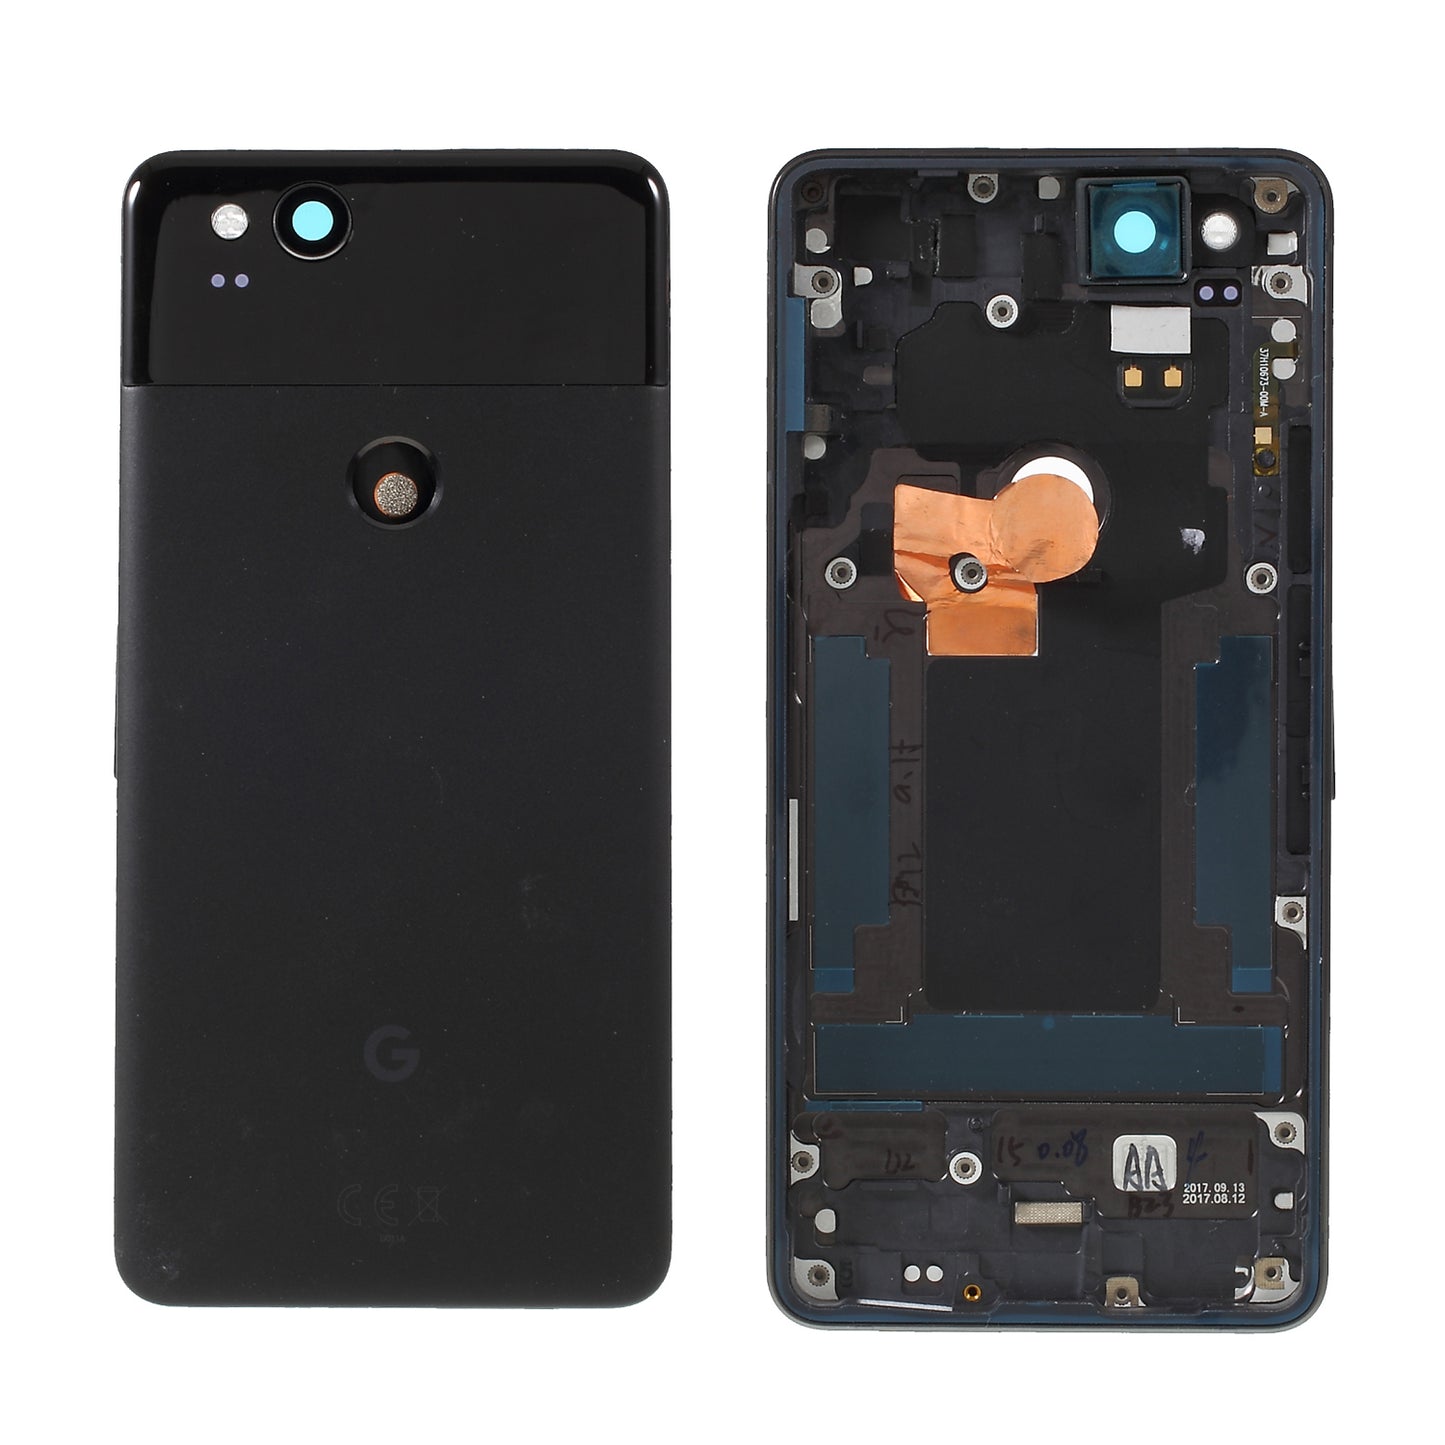 OEM Replacement Back Cover for Google Pixel 2 - Black